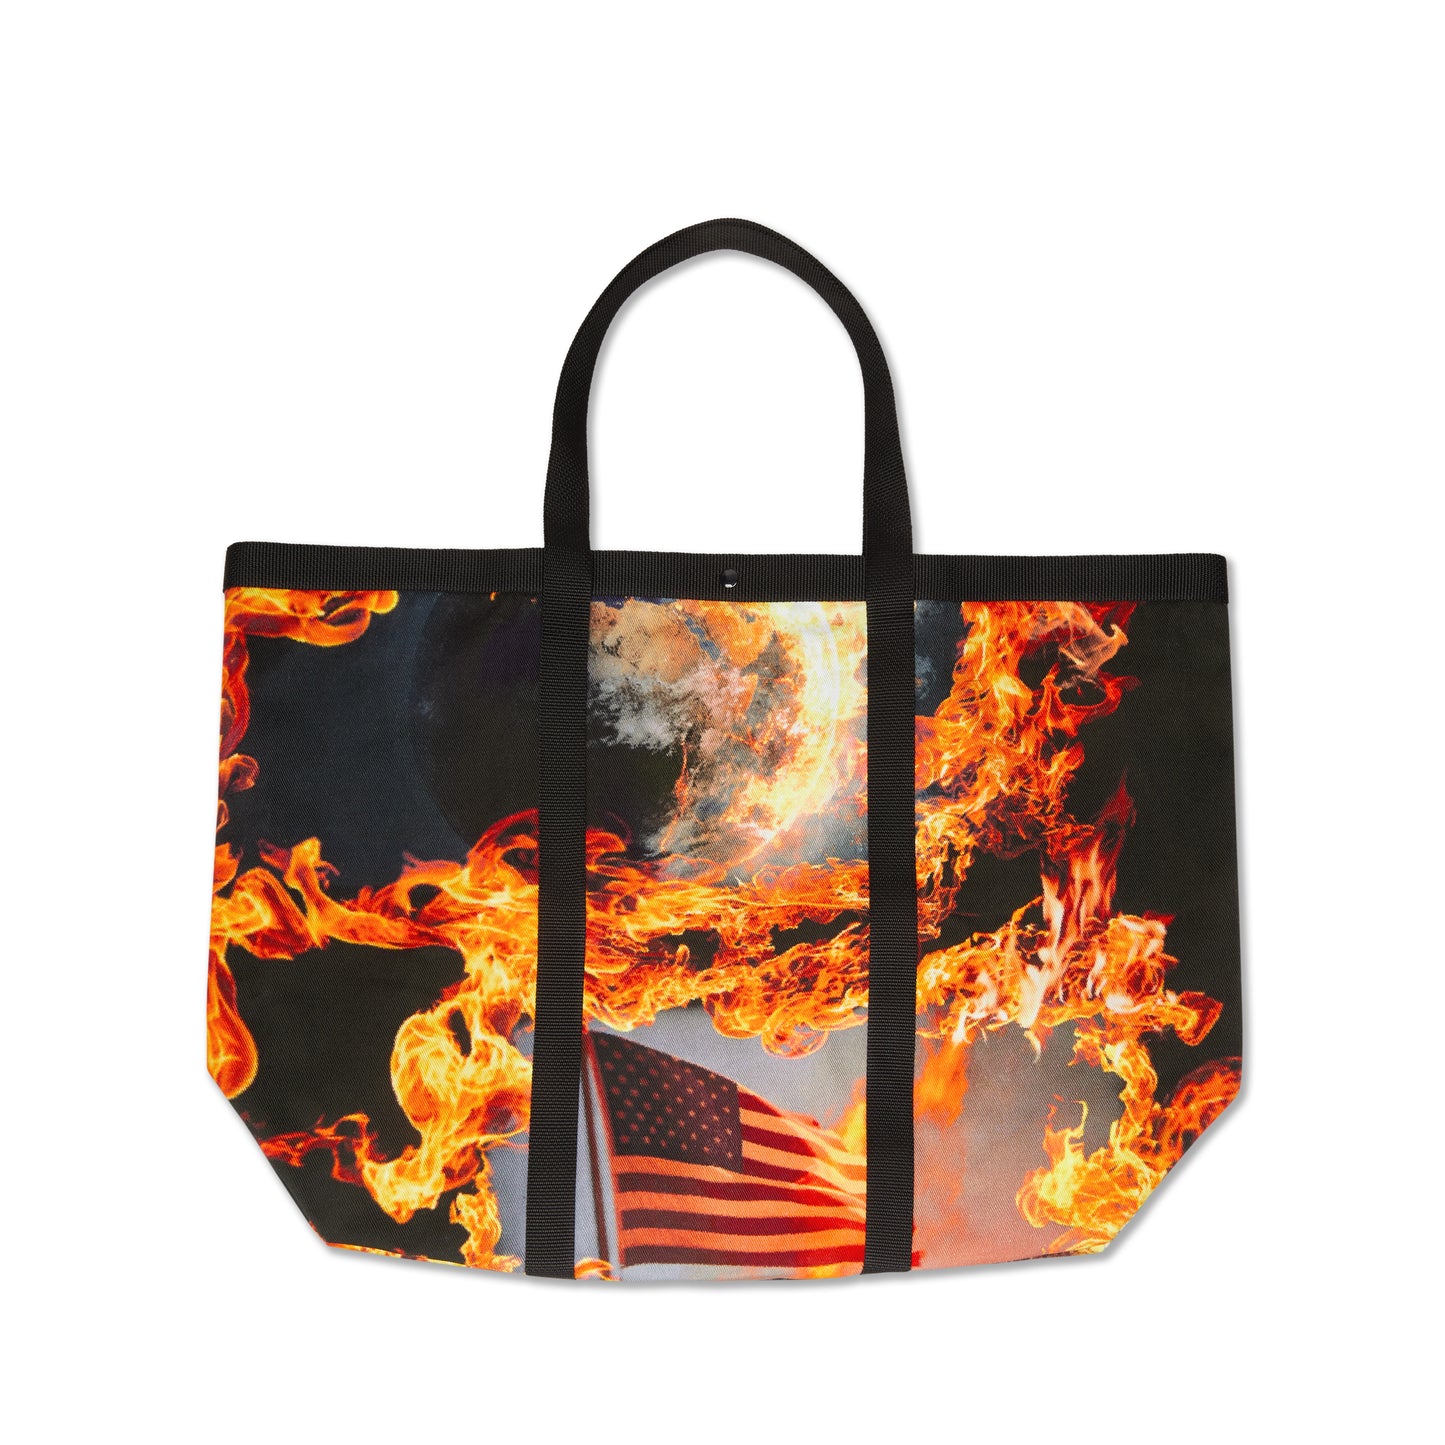 WORLD IS BURNING TOTE BAG